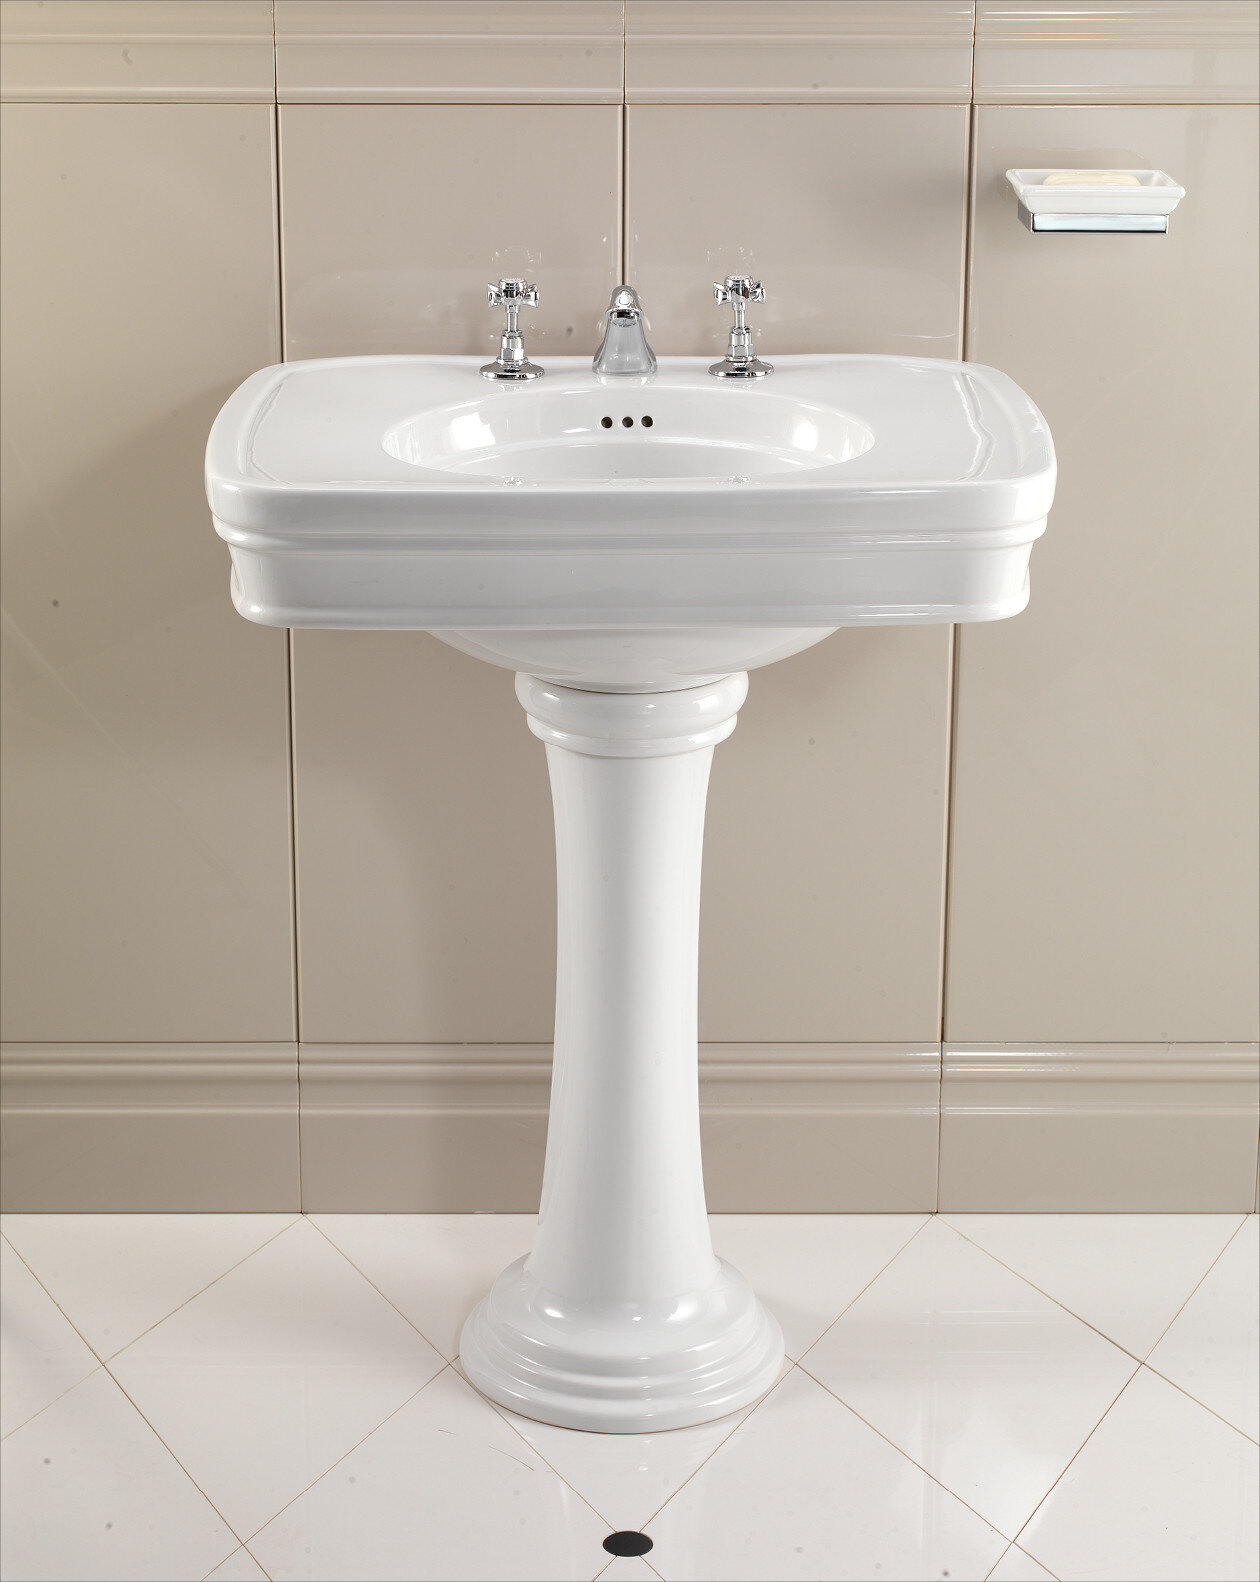 Newport Louvered Pedestal Sink Cabinet  Small bathroom storage, Pedestal  sink storage, Small bathroom